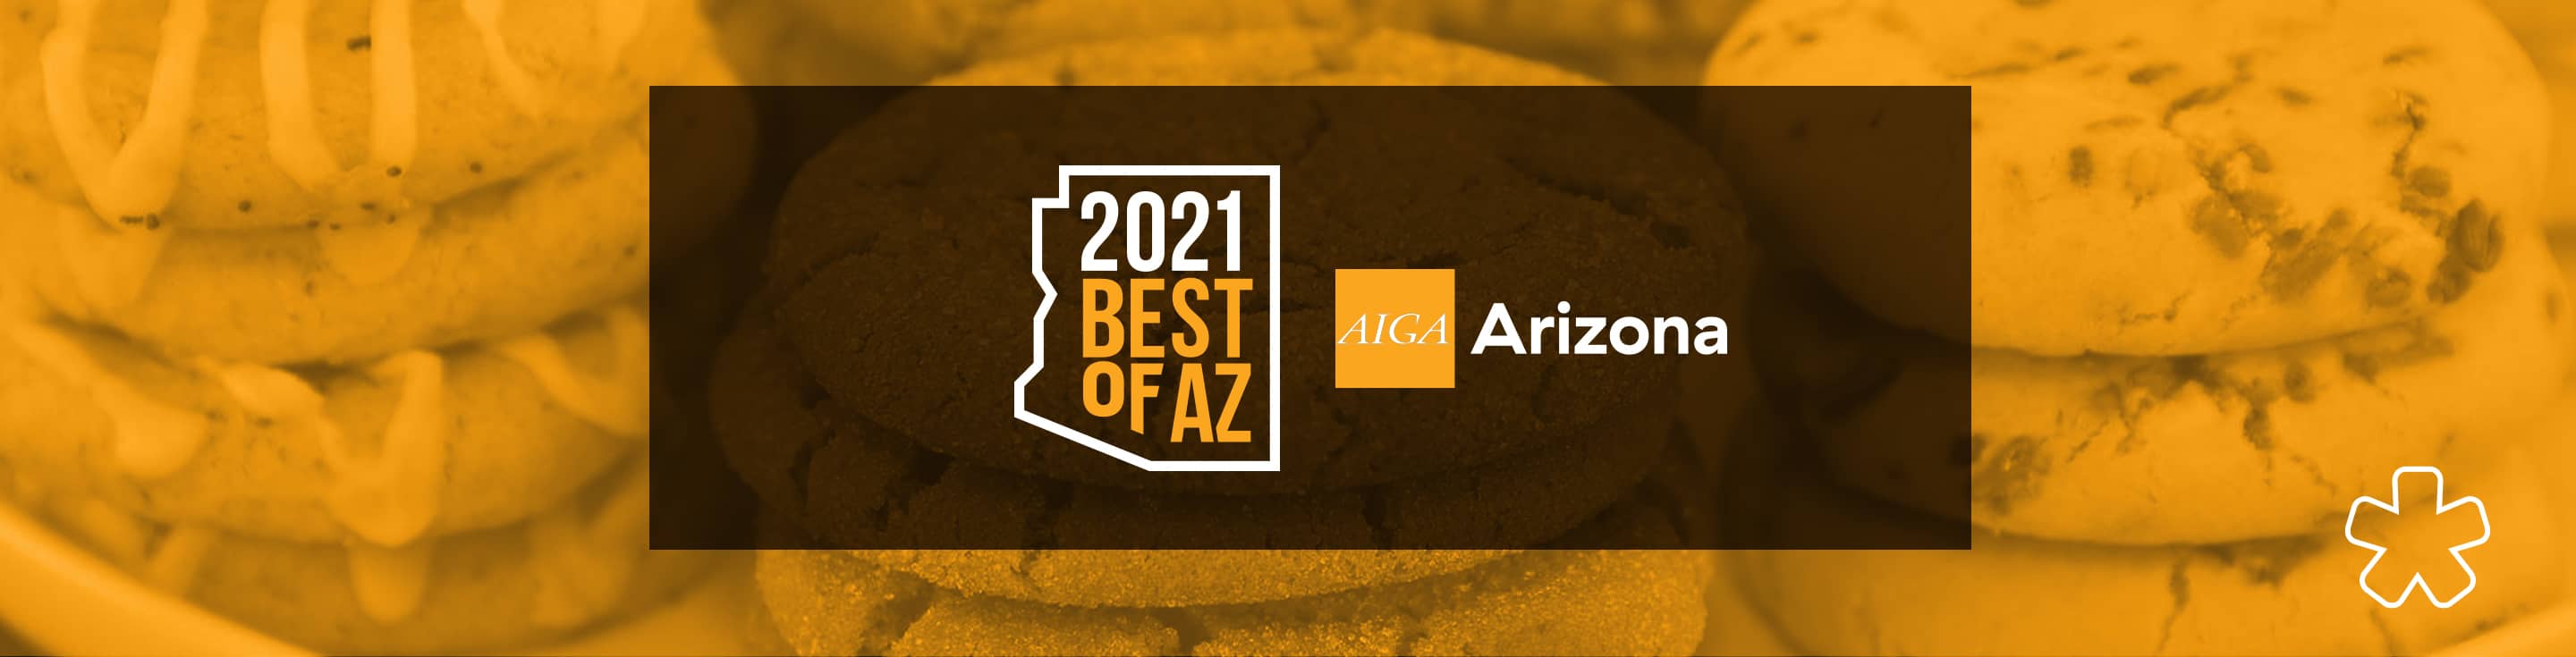 AIGA-AZ Best Of 2021 Gallery is now open for voting!